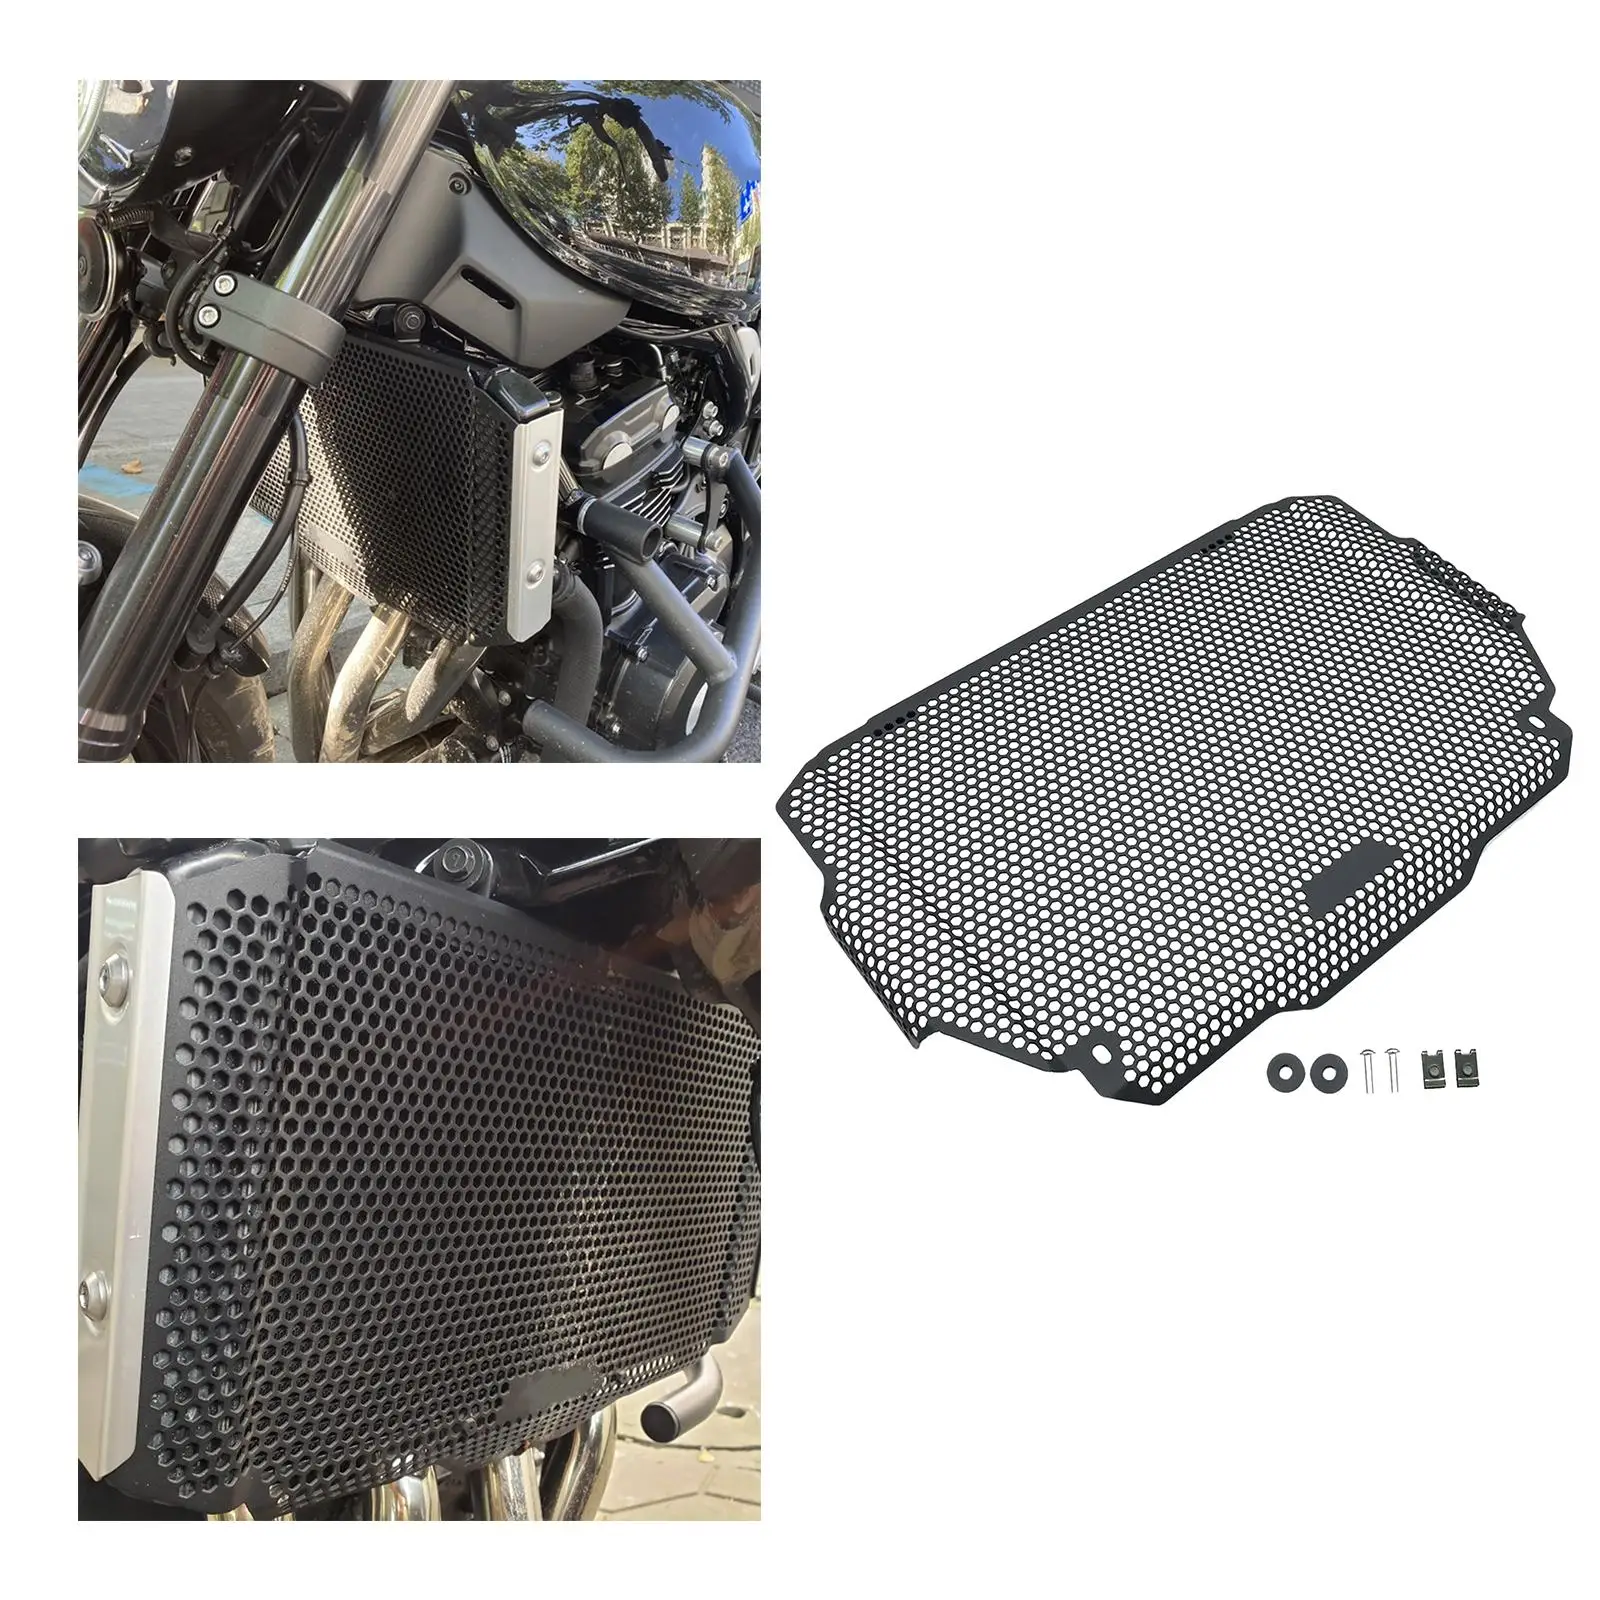 Motorcycle Radiator Guard Lightweight Water Tank Grille Cover Water Tank Cooling Protector for Kawasaki Z900 2017-21 Parts